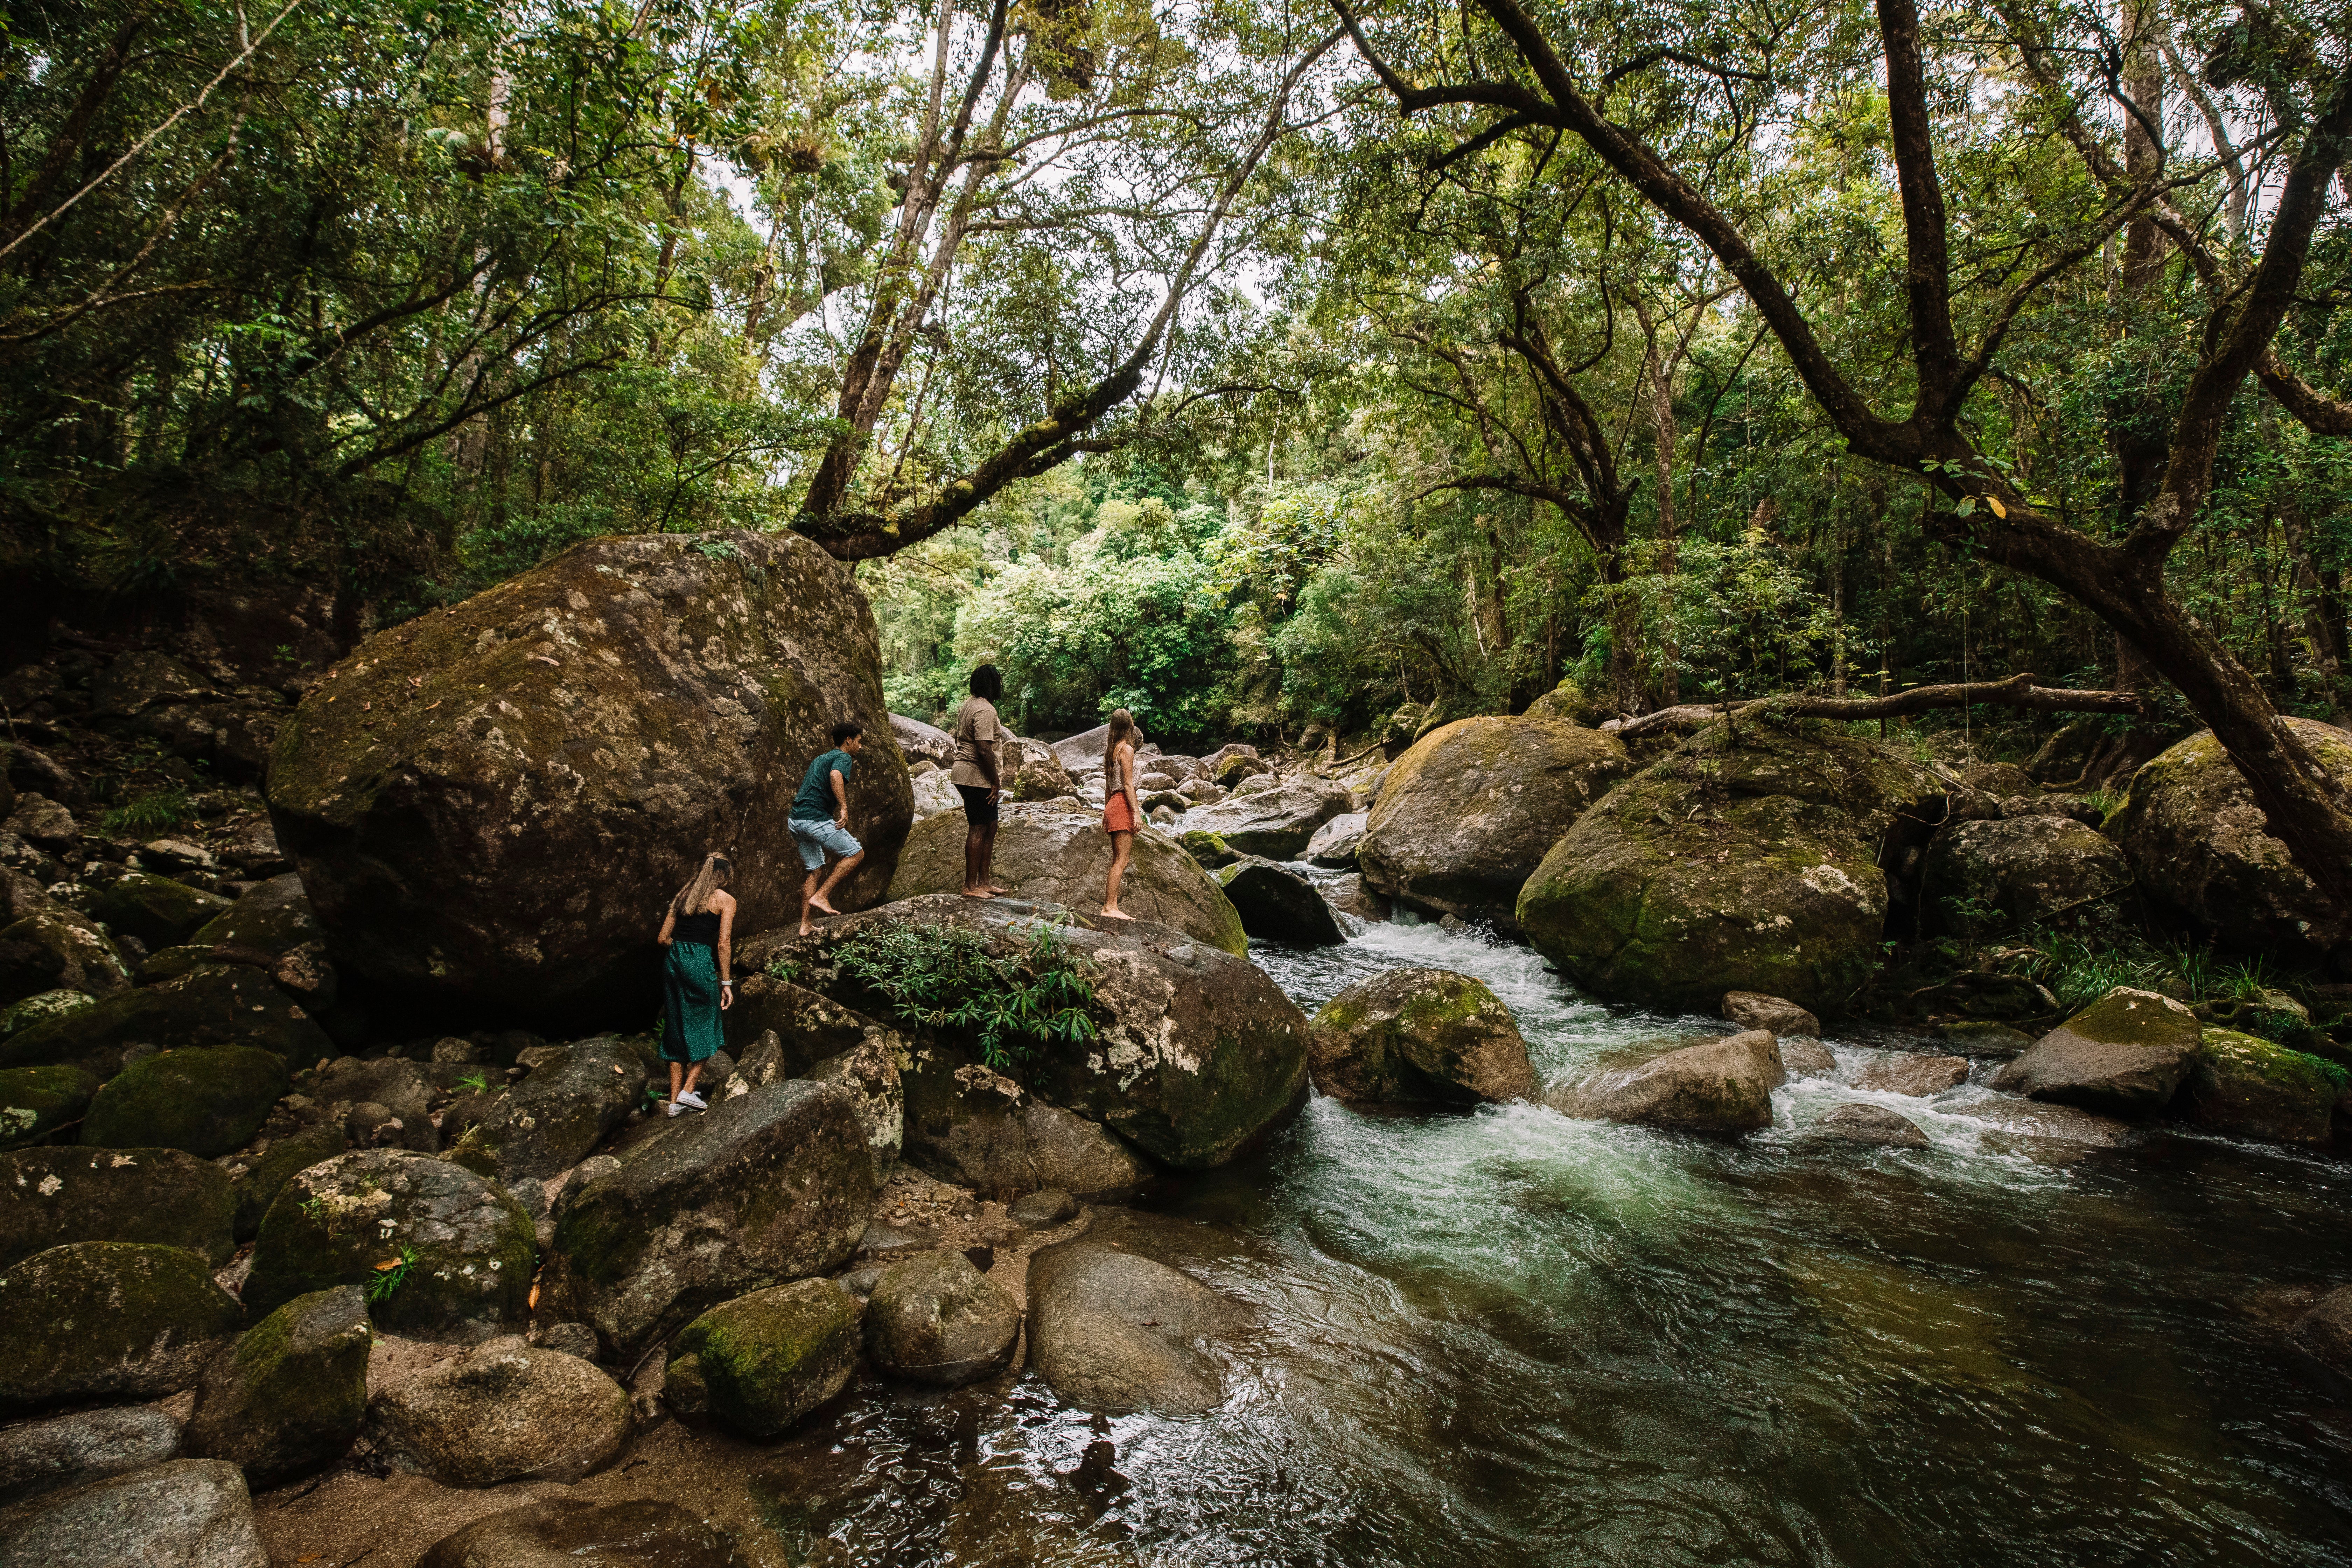 Cool off in the crystal waters of Mossman Gorge after a tour of the Daintree Rainforest